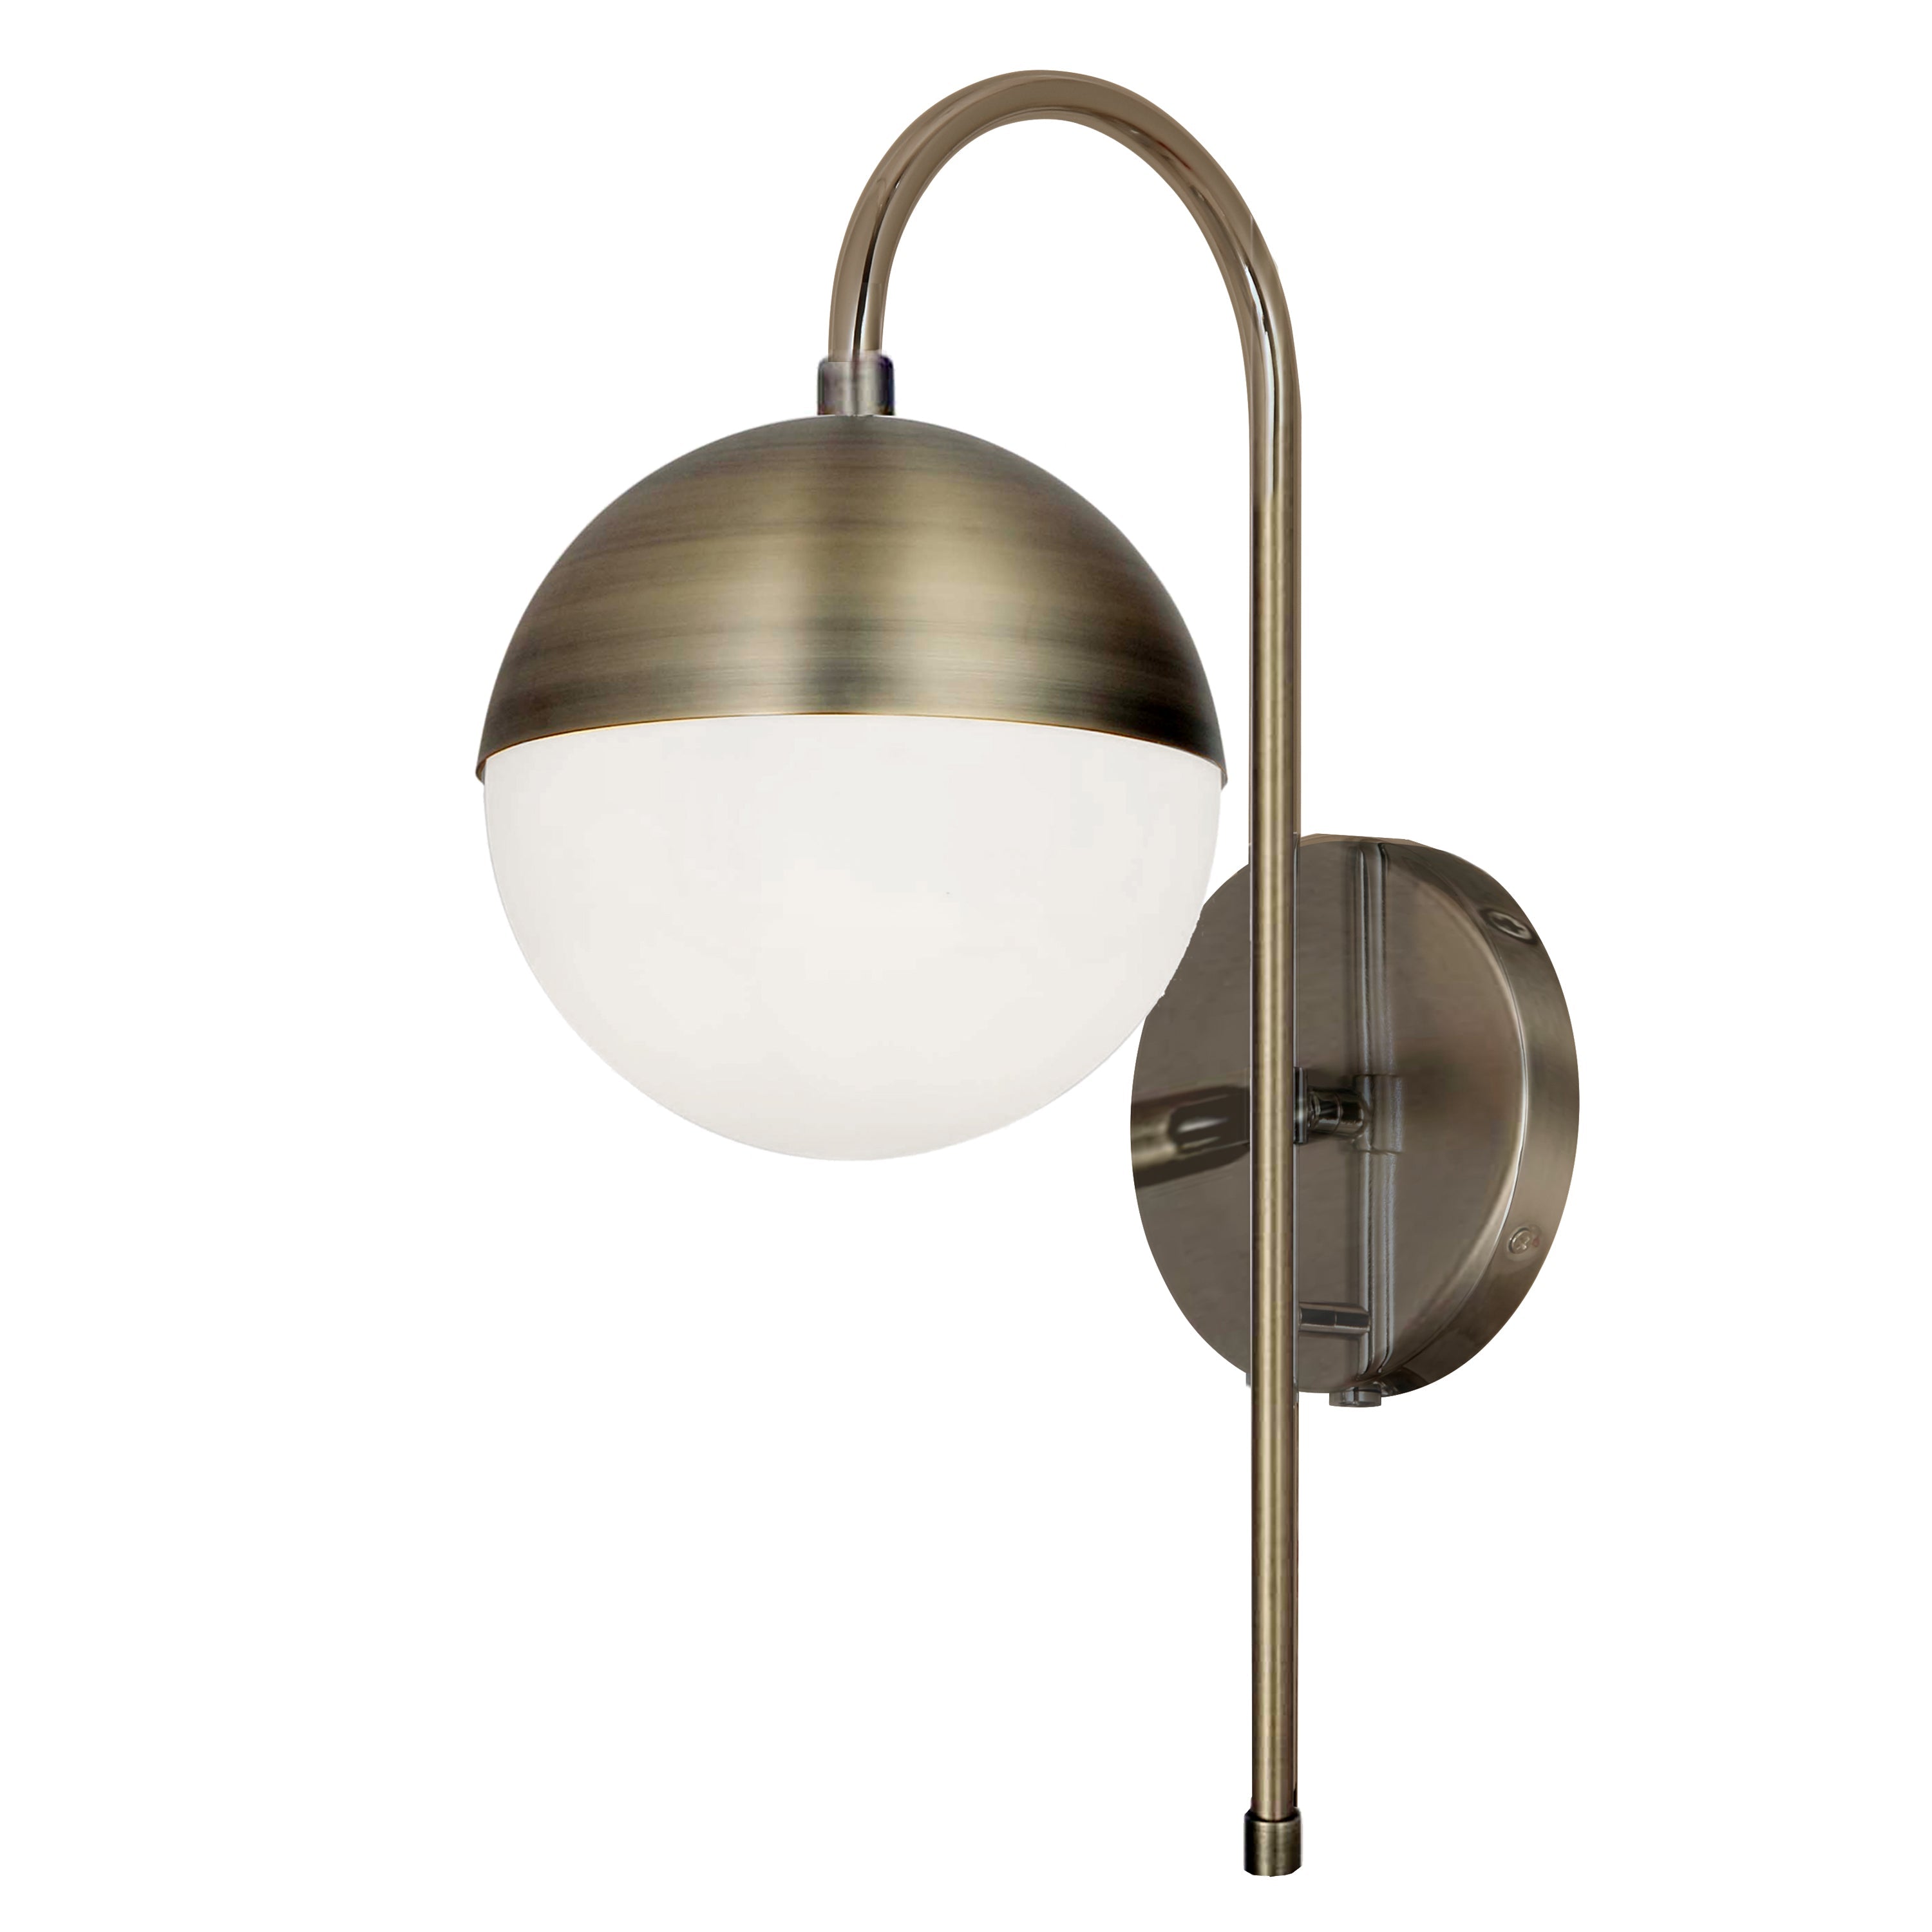 Dainolite Dayana - DAY-71W-AB - 1 Light Sconce, Antique Brass with White Glass, Hardwire and Plug-In - Antique Brass